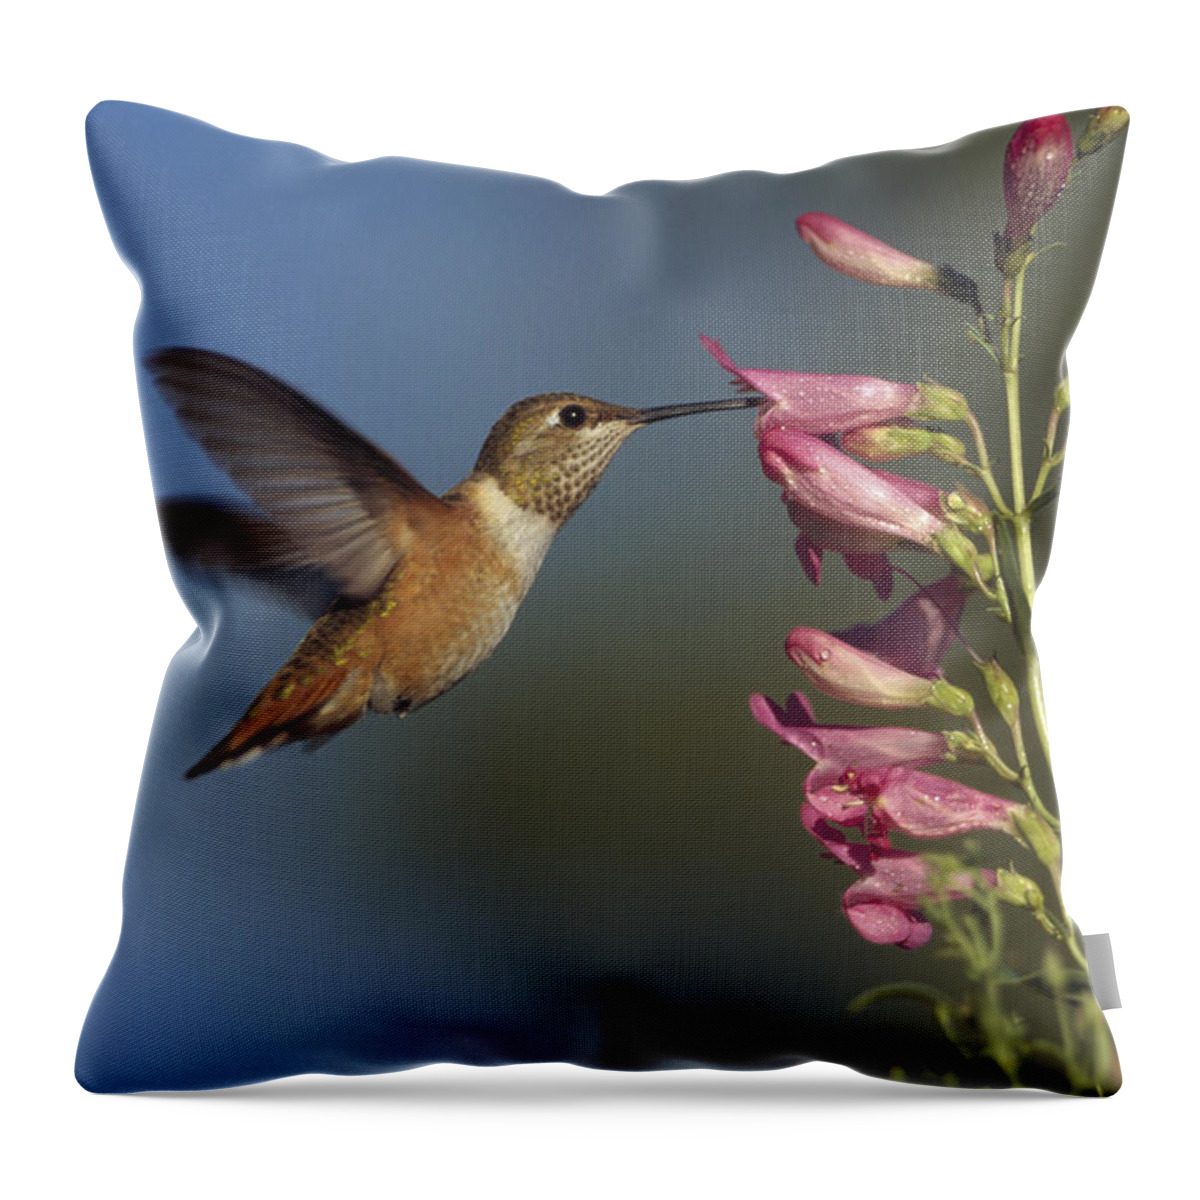 00170237 Throw Pillow featuring the photograph Rufous Hummingbird Feeding On Flowers by Tim Fitzharris